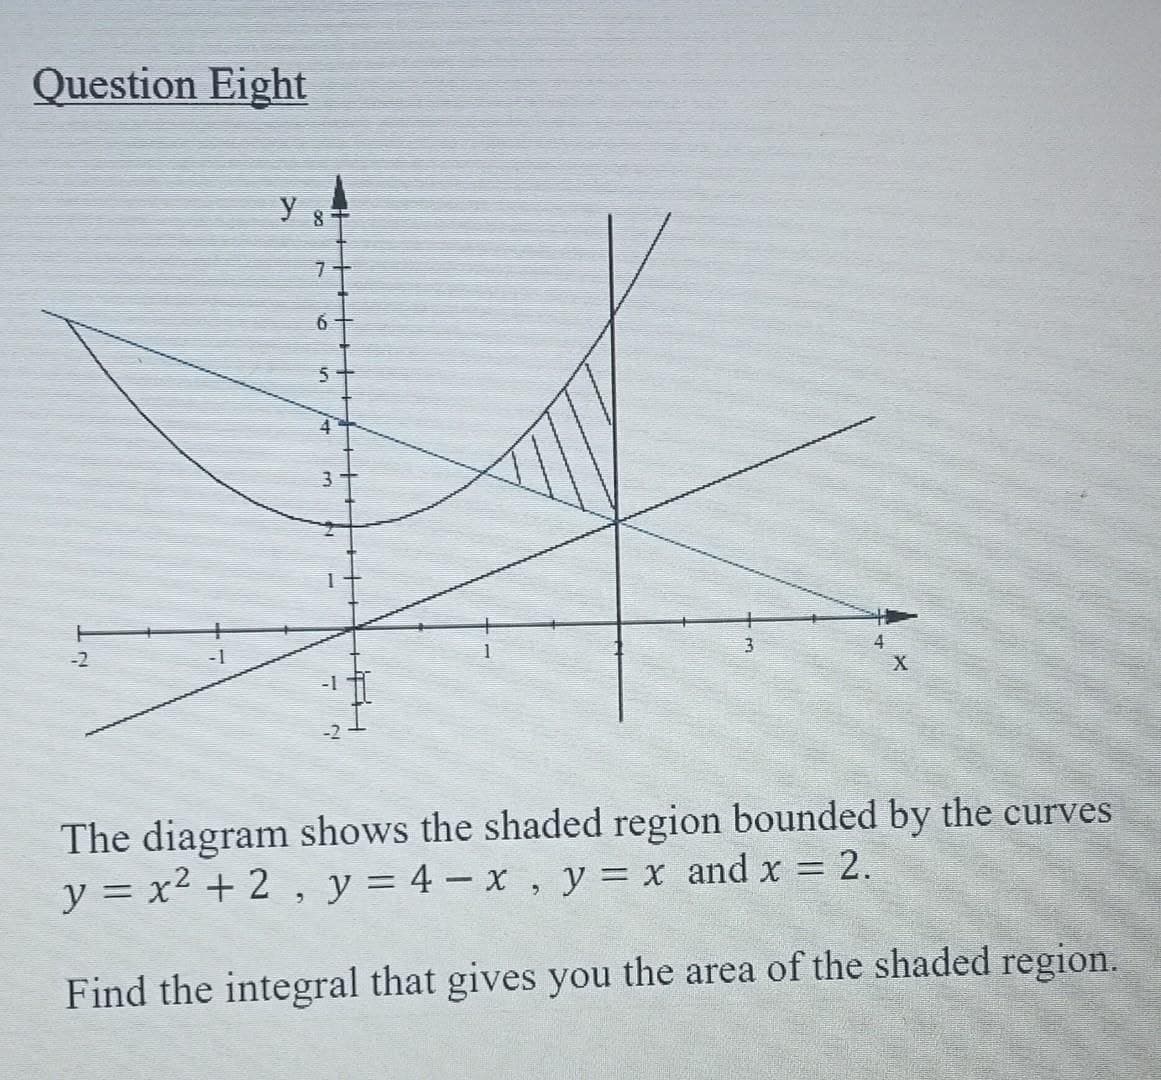 Question Eight
Y s
6
5
4
X
-1
-2
The diagram shows the shaded region bounded by the curves
y = x² + 2, y = 4 - x, y = x and x = 2.
Find the integral that gives you the area of the shaded region.
TH